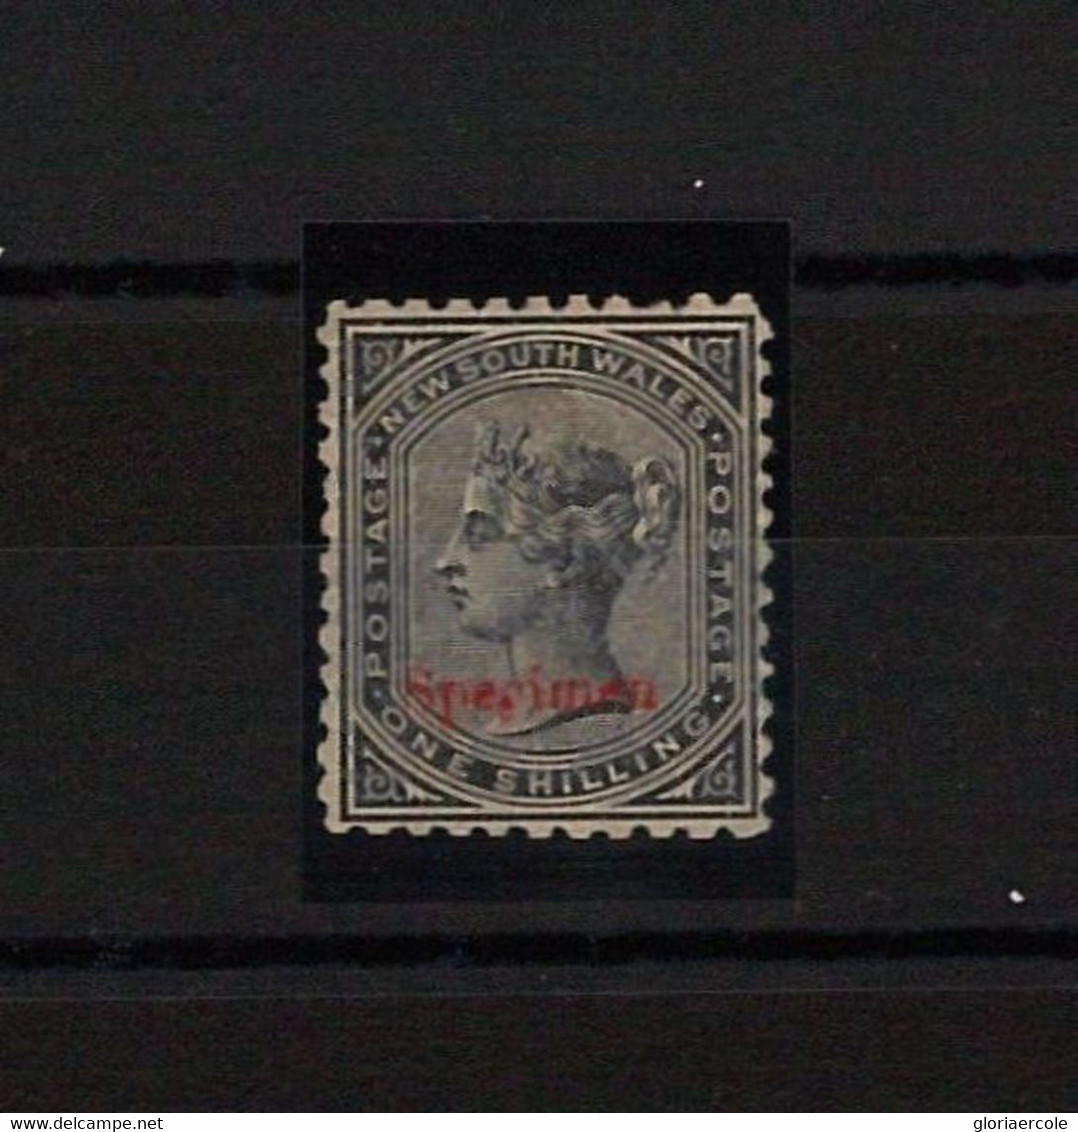 39639 - AUSTRALIA New South Wales - STAMP: Stanley Gibbons # 238  SPECIMEN  MNH - Mint Stamps